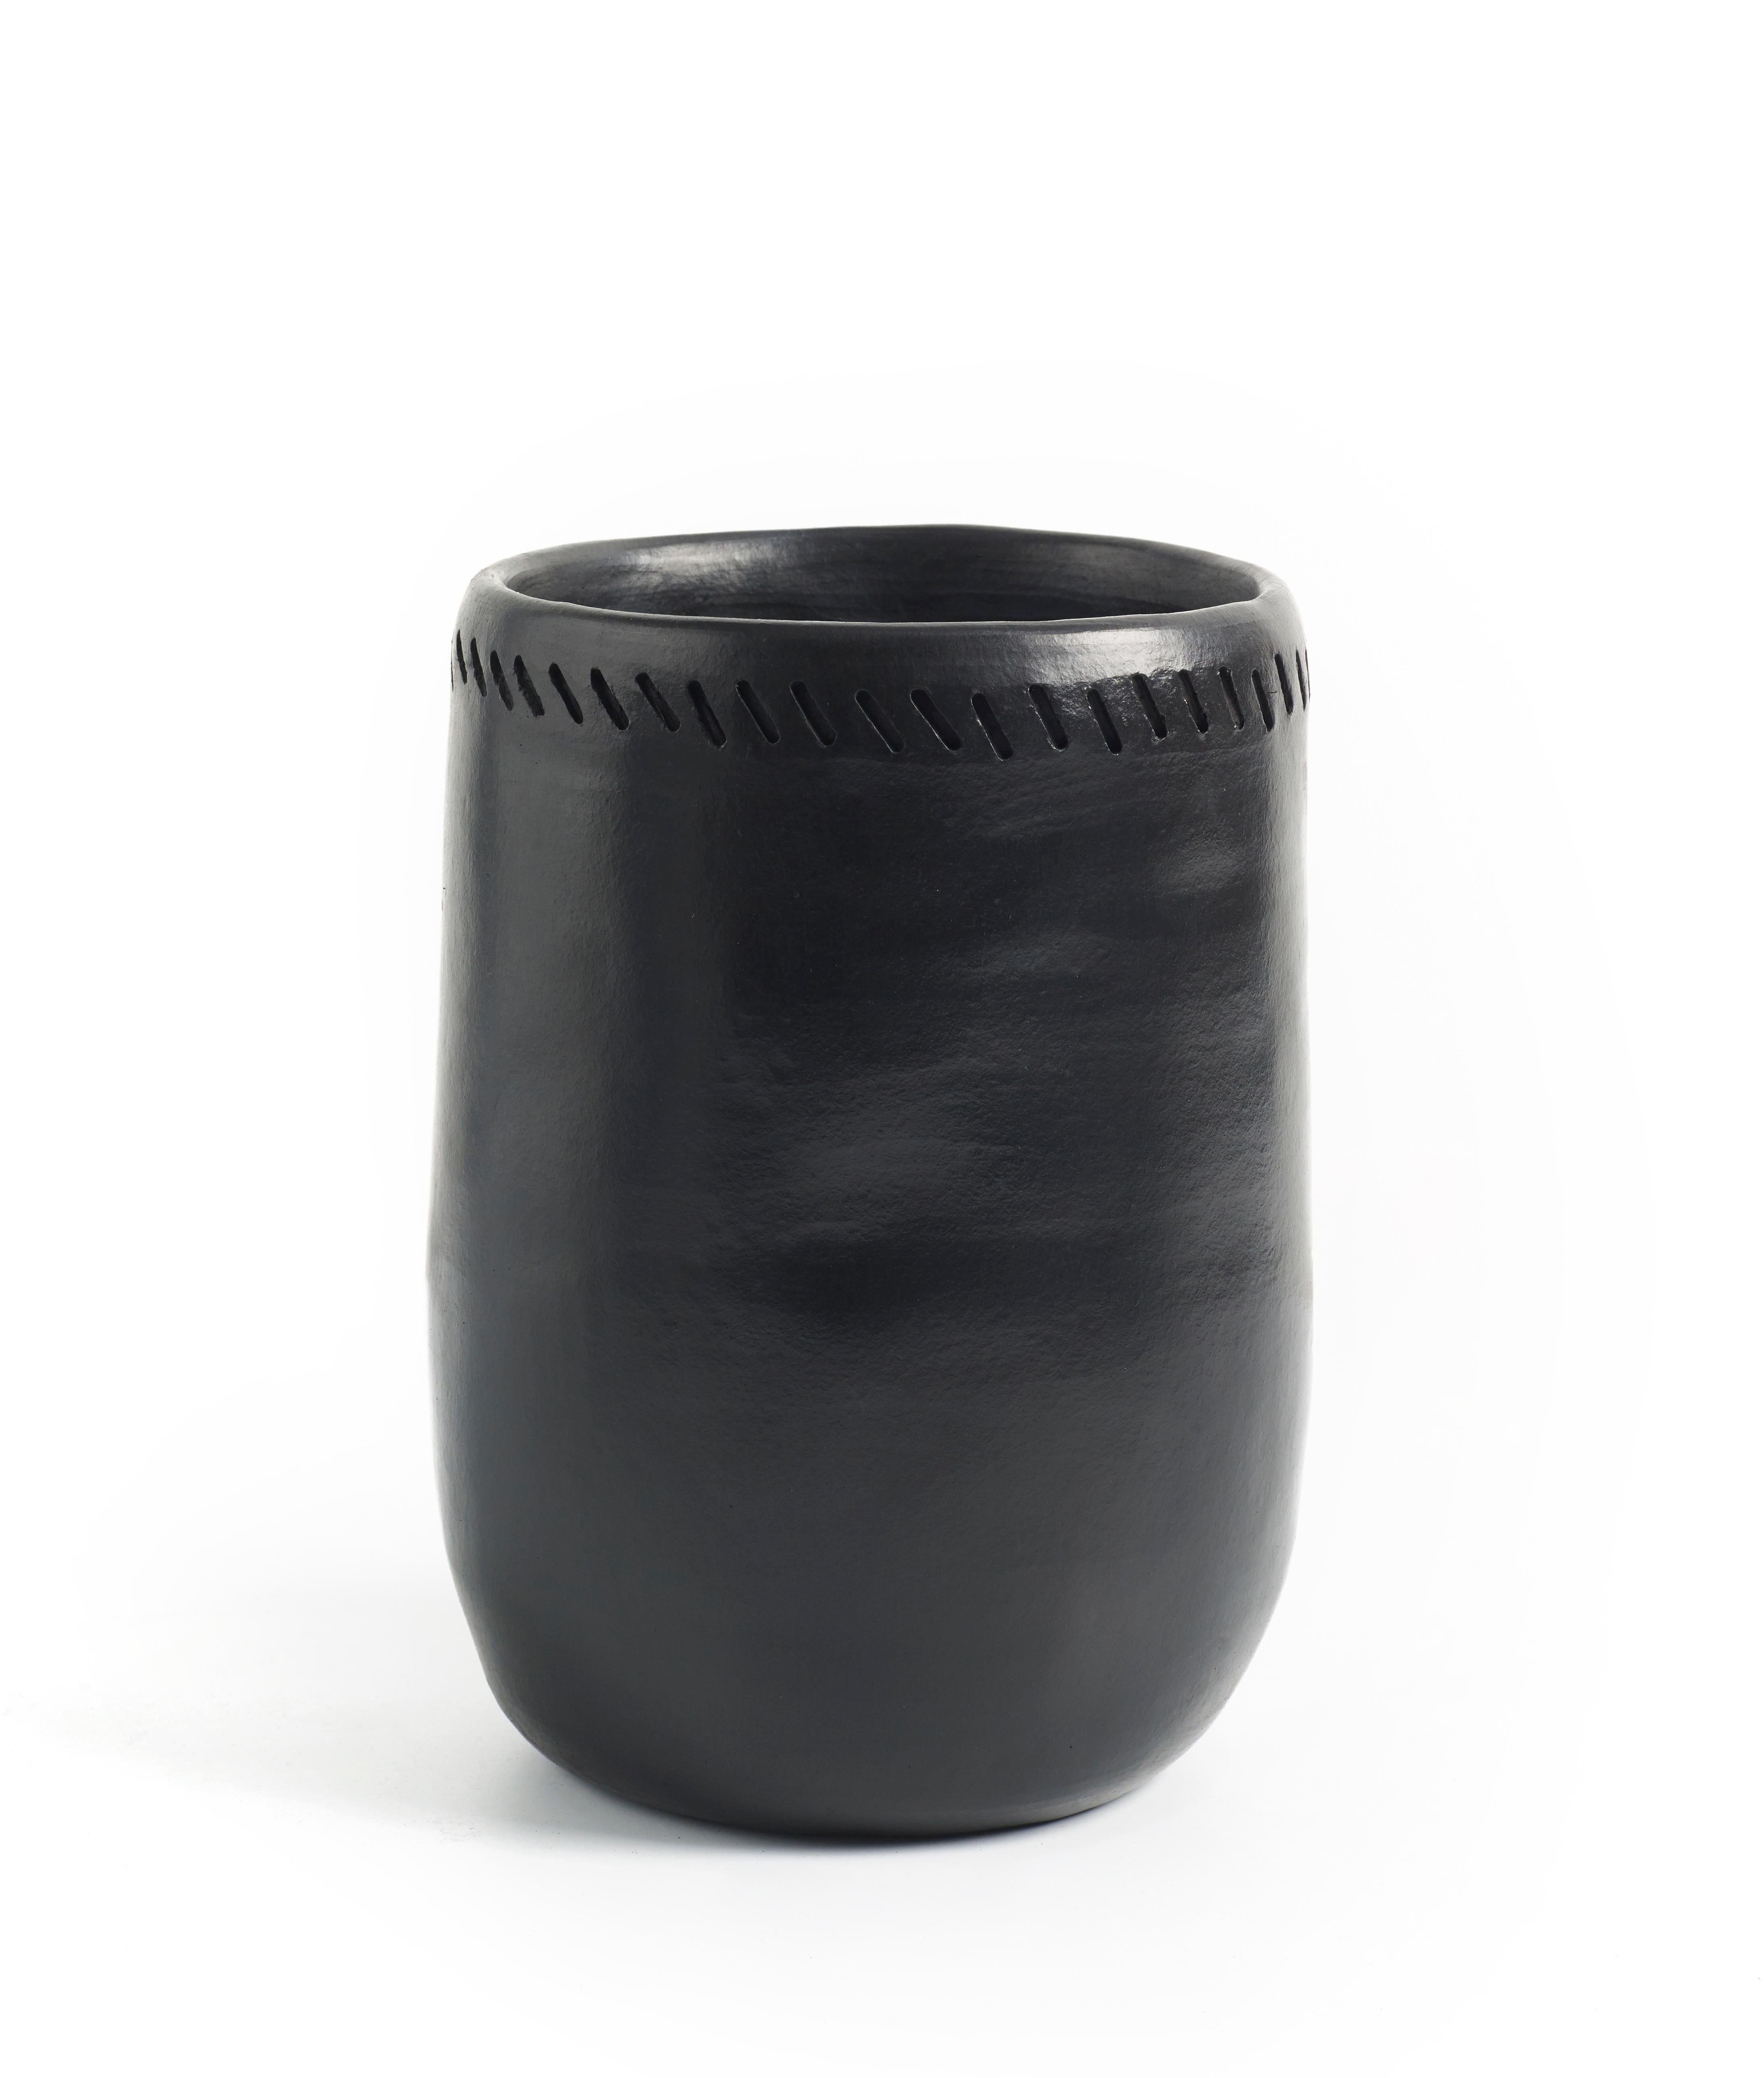 Vase 1 barro dining by Sebastian Herkner
Materials: heat-resistant Black ceramic. 
Technique: Glazed. Oven cooked and polished with semi-precious stones. 
Dimensions: Diameter 12 cm x H 20 cm 
Available in size large. 

This vase belongs to